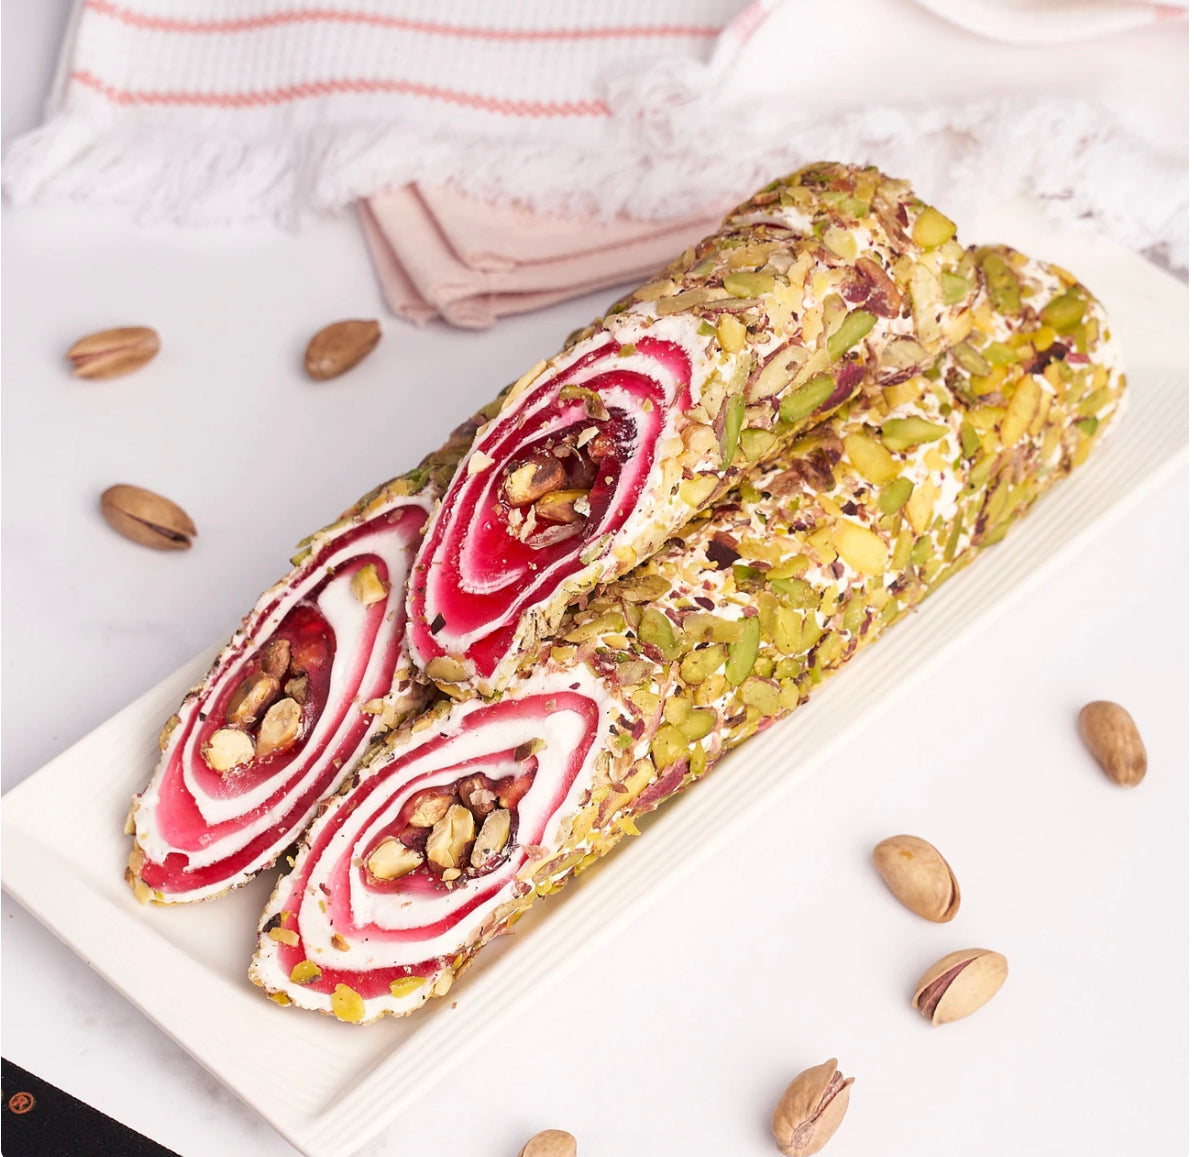 Rose Sultan's Delight with Pistachios